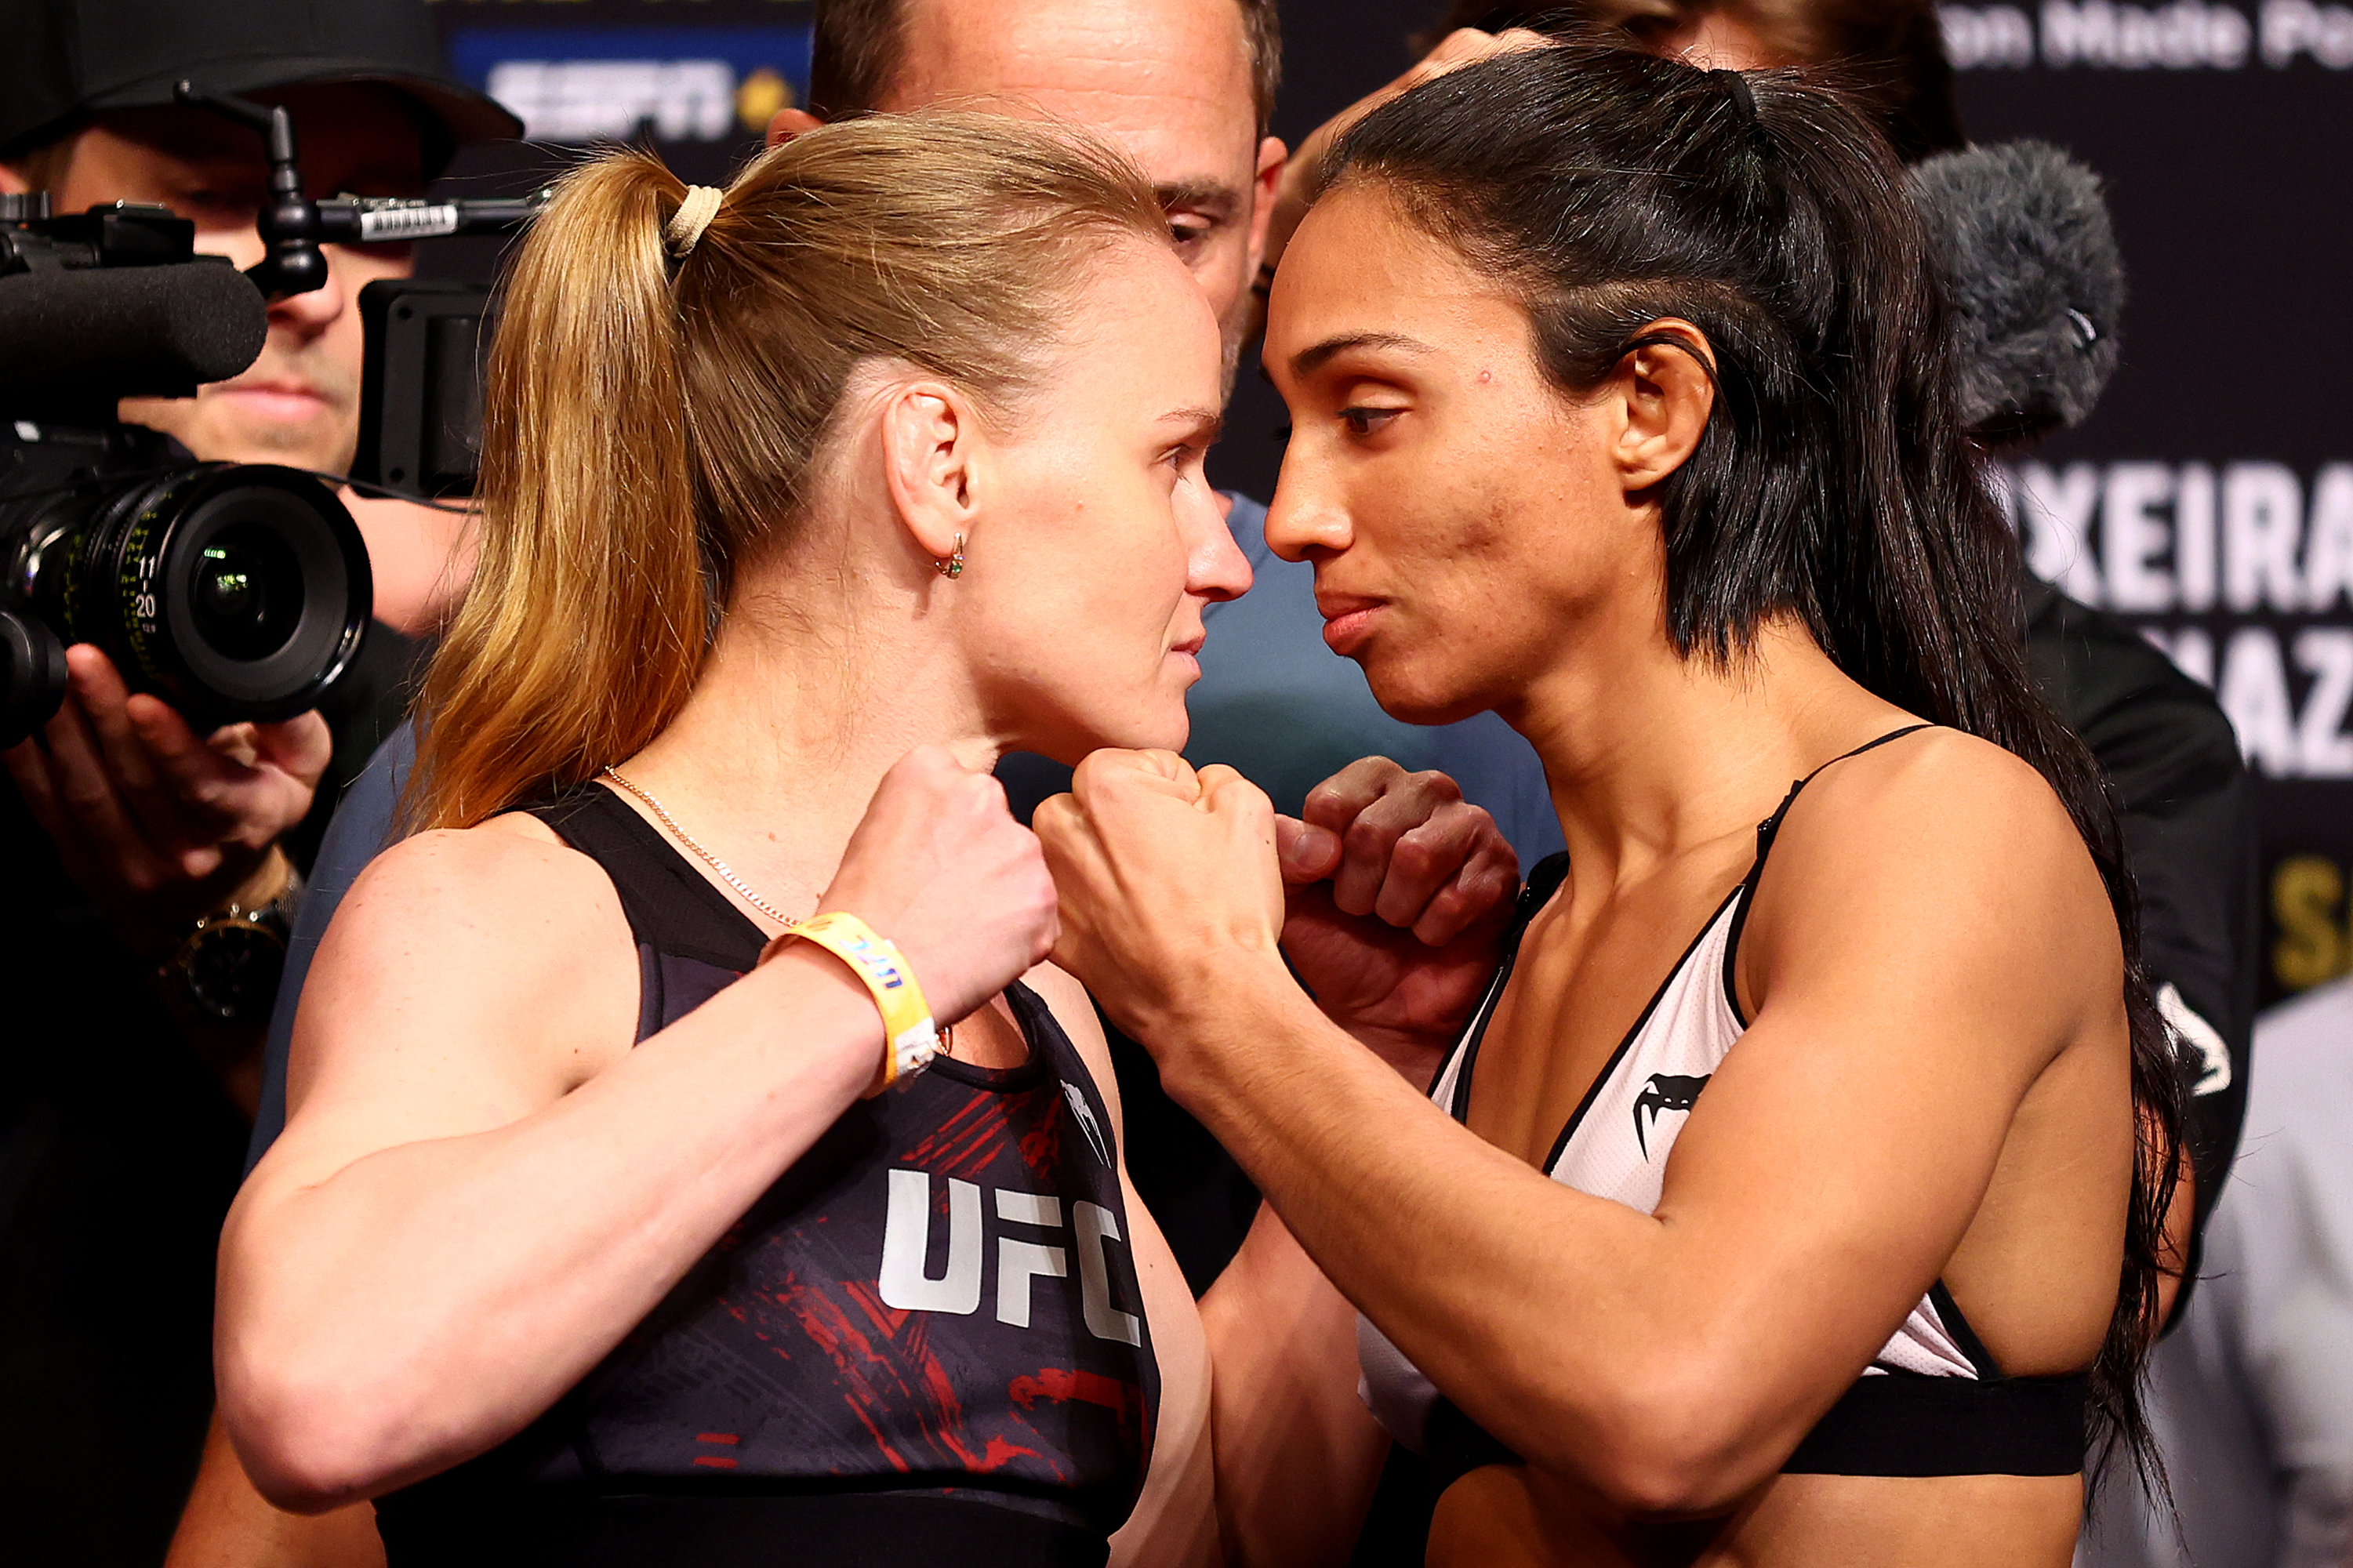 UFC flyweight champion Valentina Shevchenko (L) of Kyrgyzstan and Taila Santos of Brazil face off ahead of their title bout during the UFC 275 Weigh-in at Singapore Indoor Stadium on June 10, 2022 in Singapore.